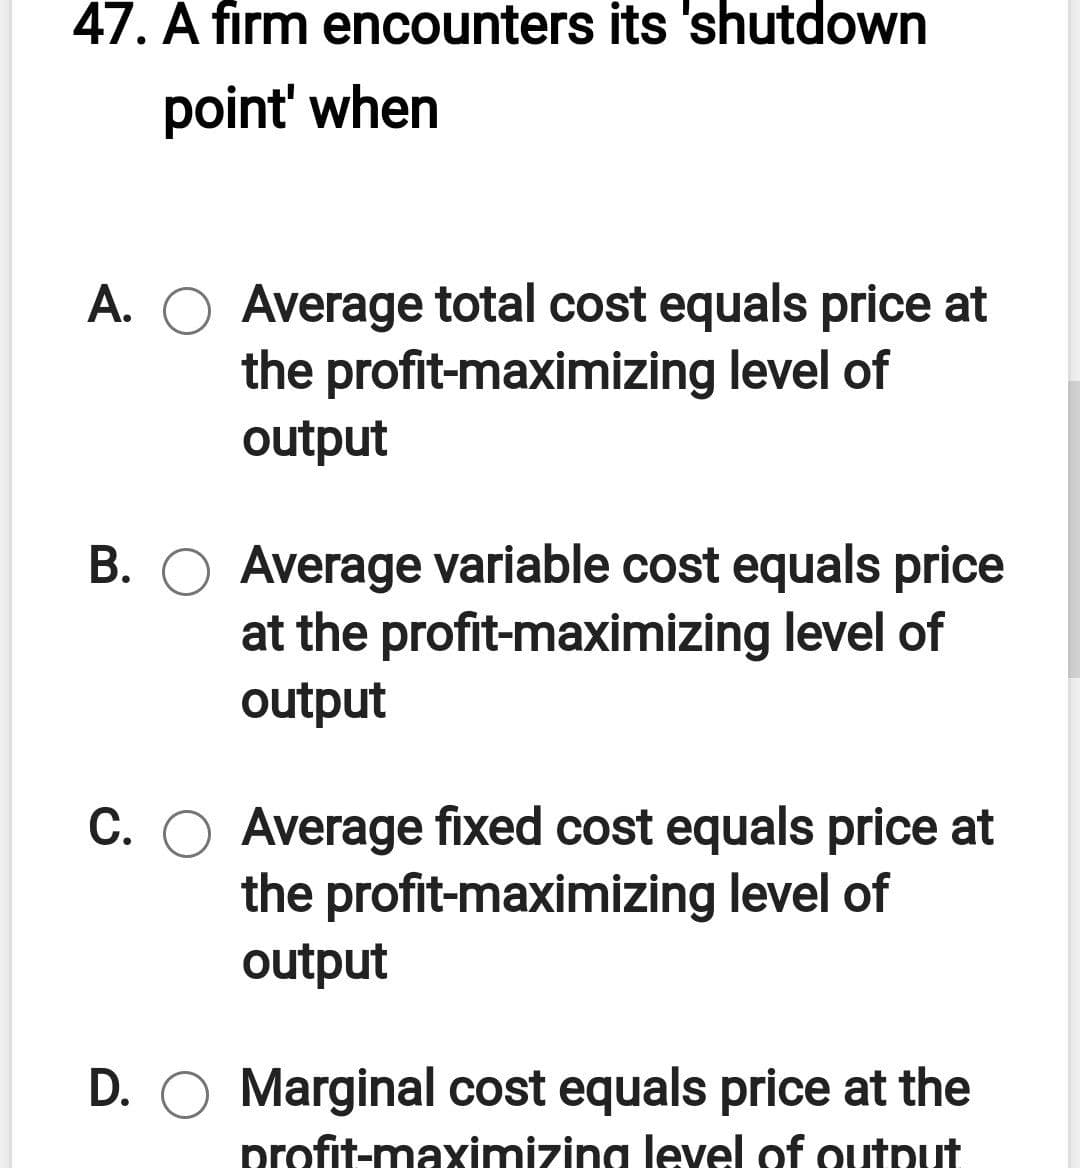 47. A firm encounters its 'shutdown
point' when
A. O Average total cost equals price at
the profit-maximizing level of
output
B. O Average variable cost equals price
at the profit-maximizing level of
output
C. O Average fixed cost equals price at
the profit-maximizing level of
output
D. O Marginal cost equals price at the
profit-maximizing level of output
